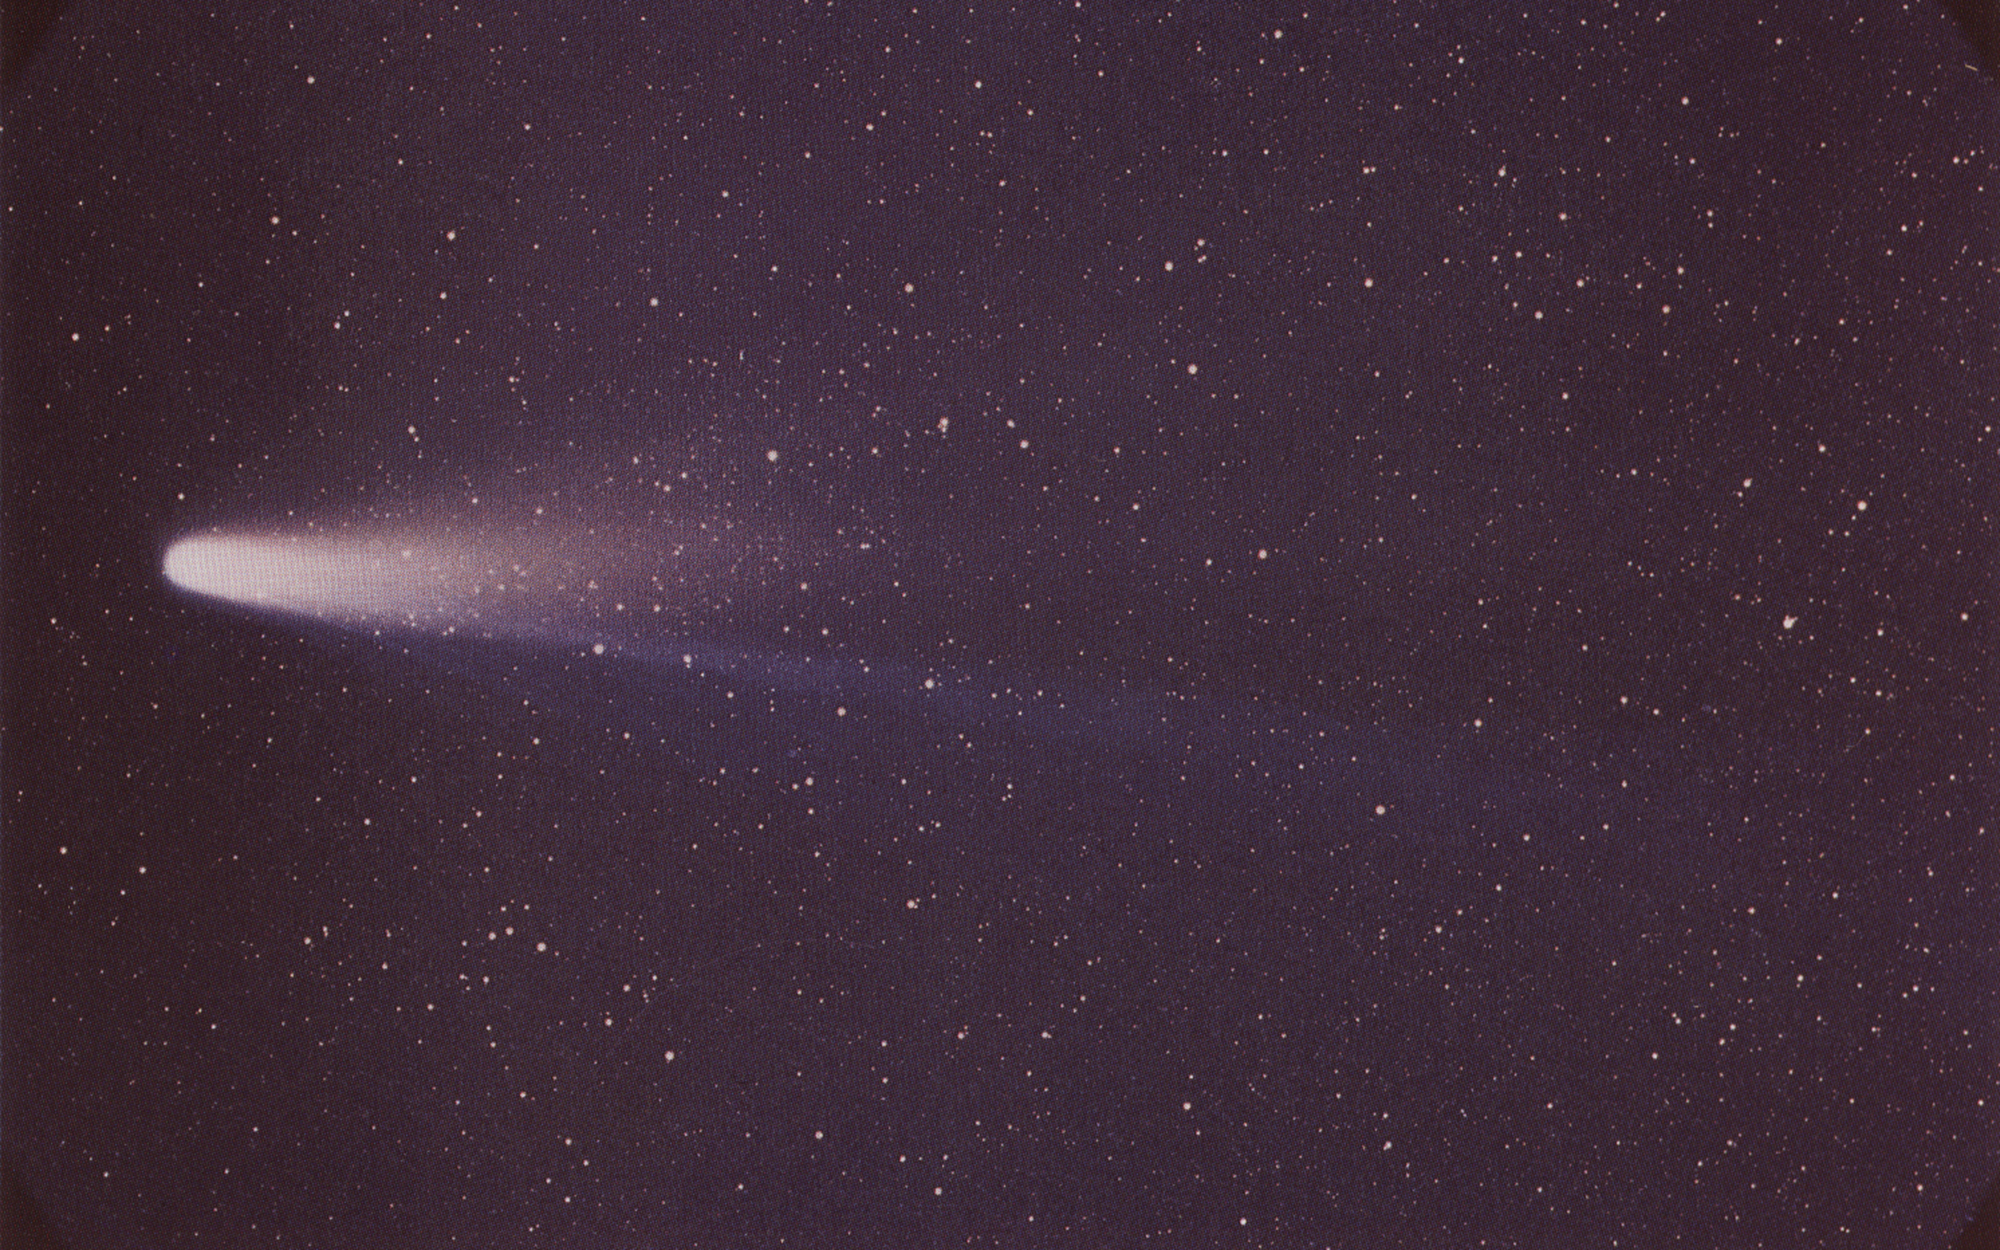 Halley’s comet is on its way back towards Earth